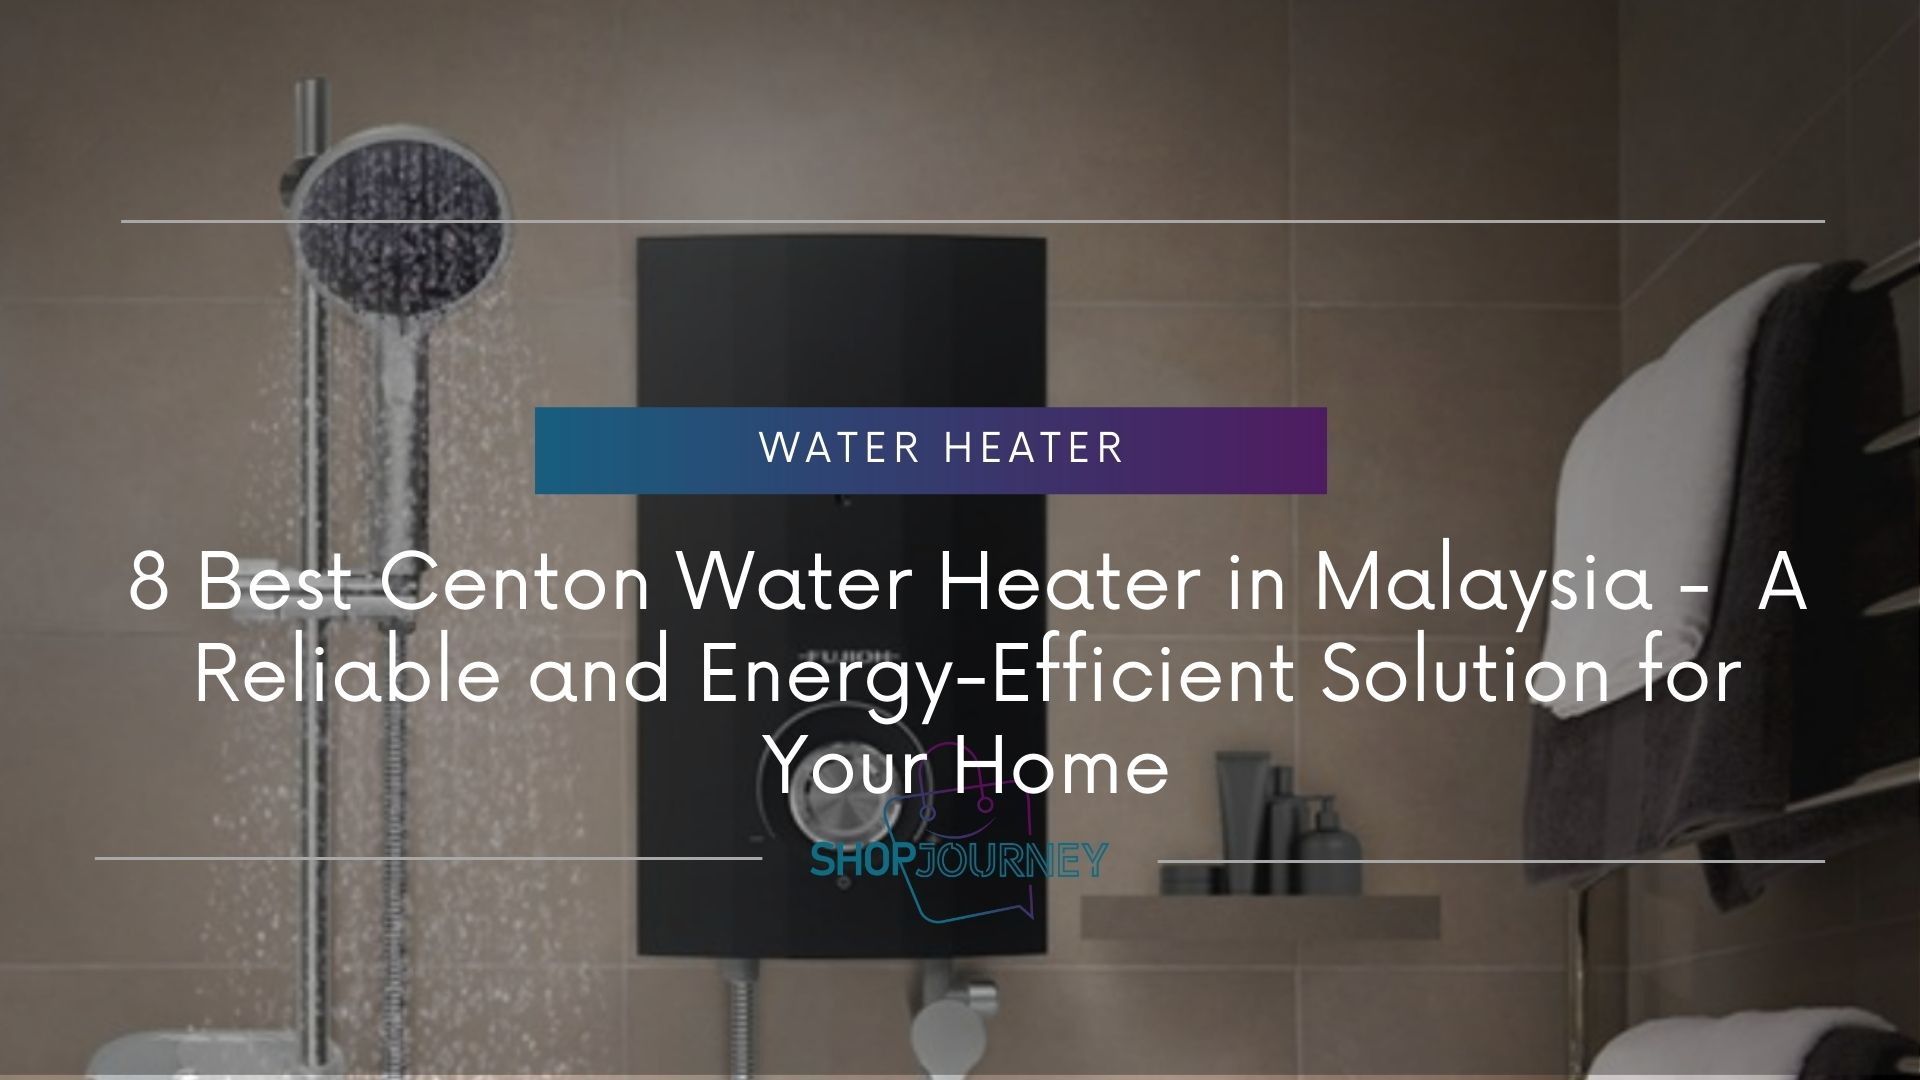 Centon water heater, the best central water heater Malaysia, provides a reliable and energy-efficient solution for your home.